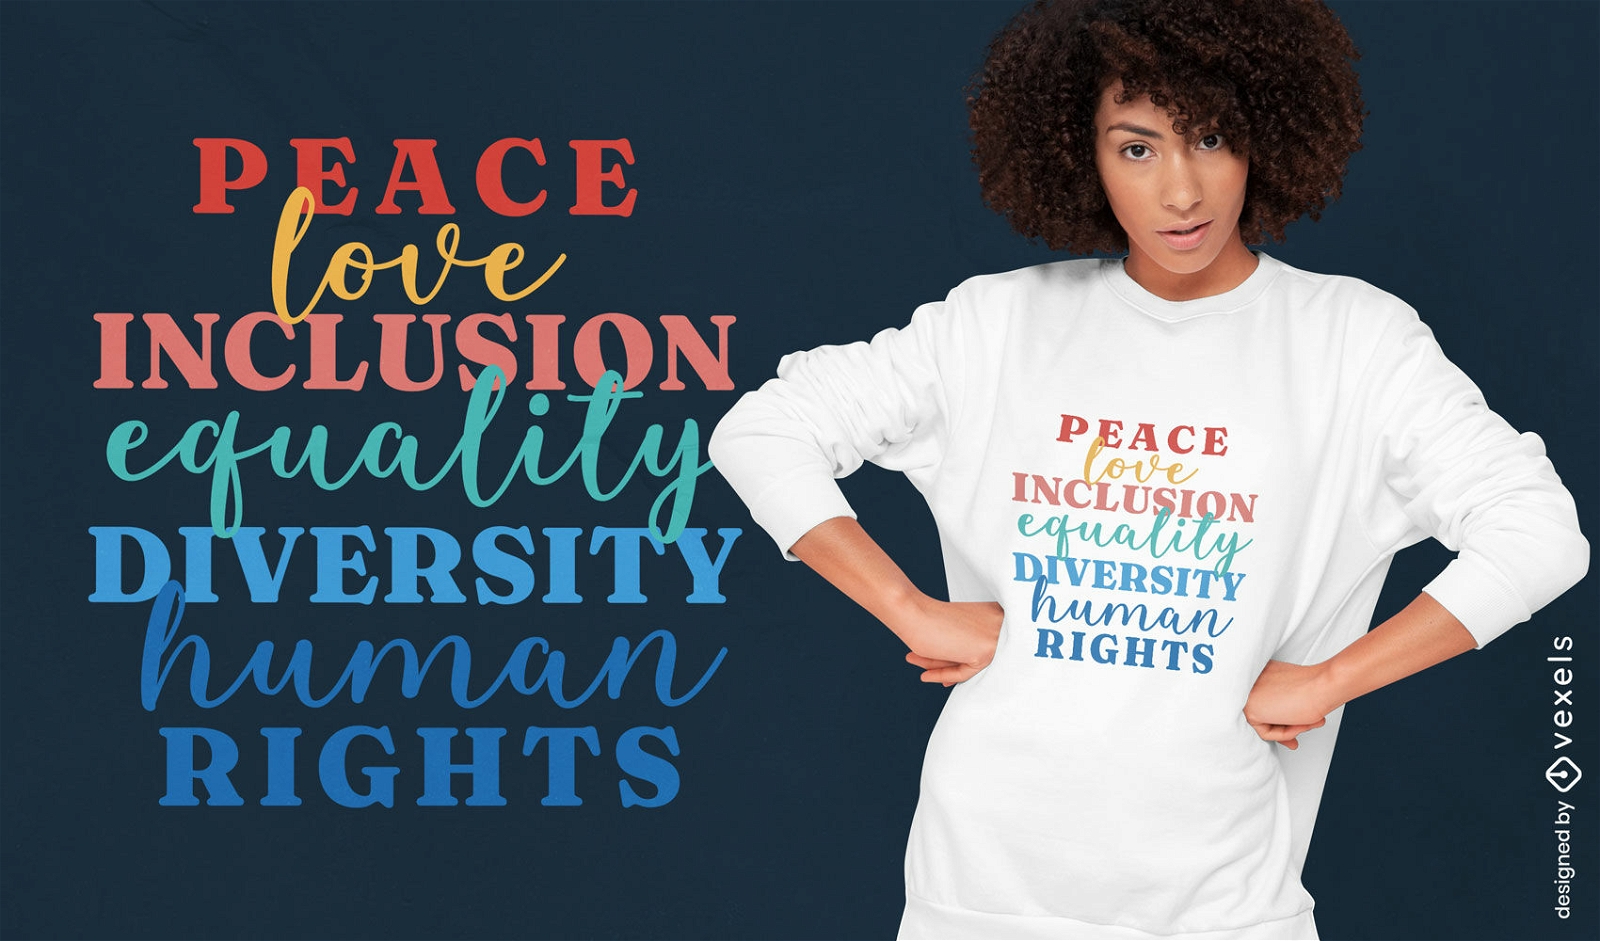 Human rights quote t-shirt design